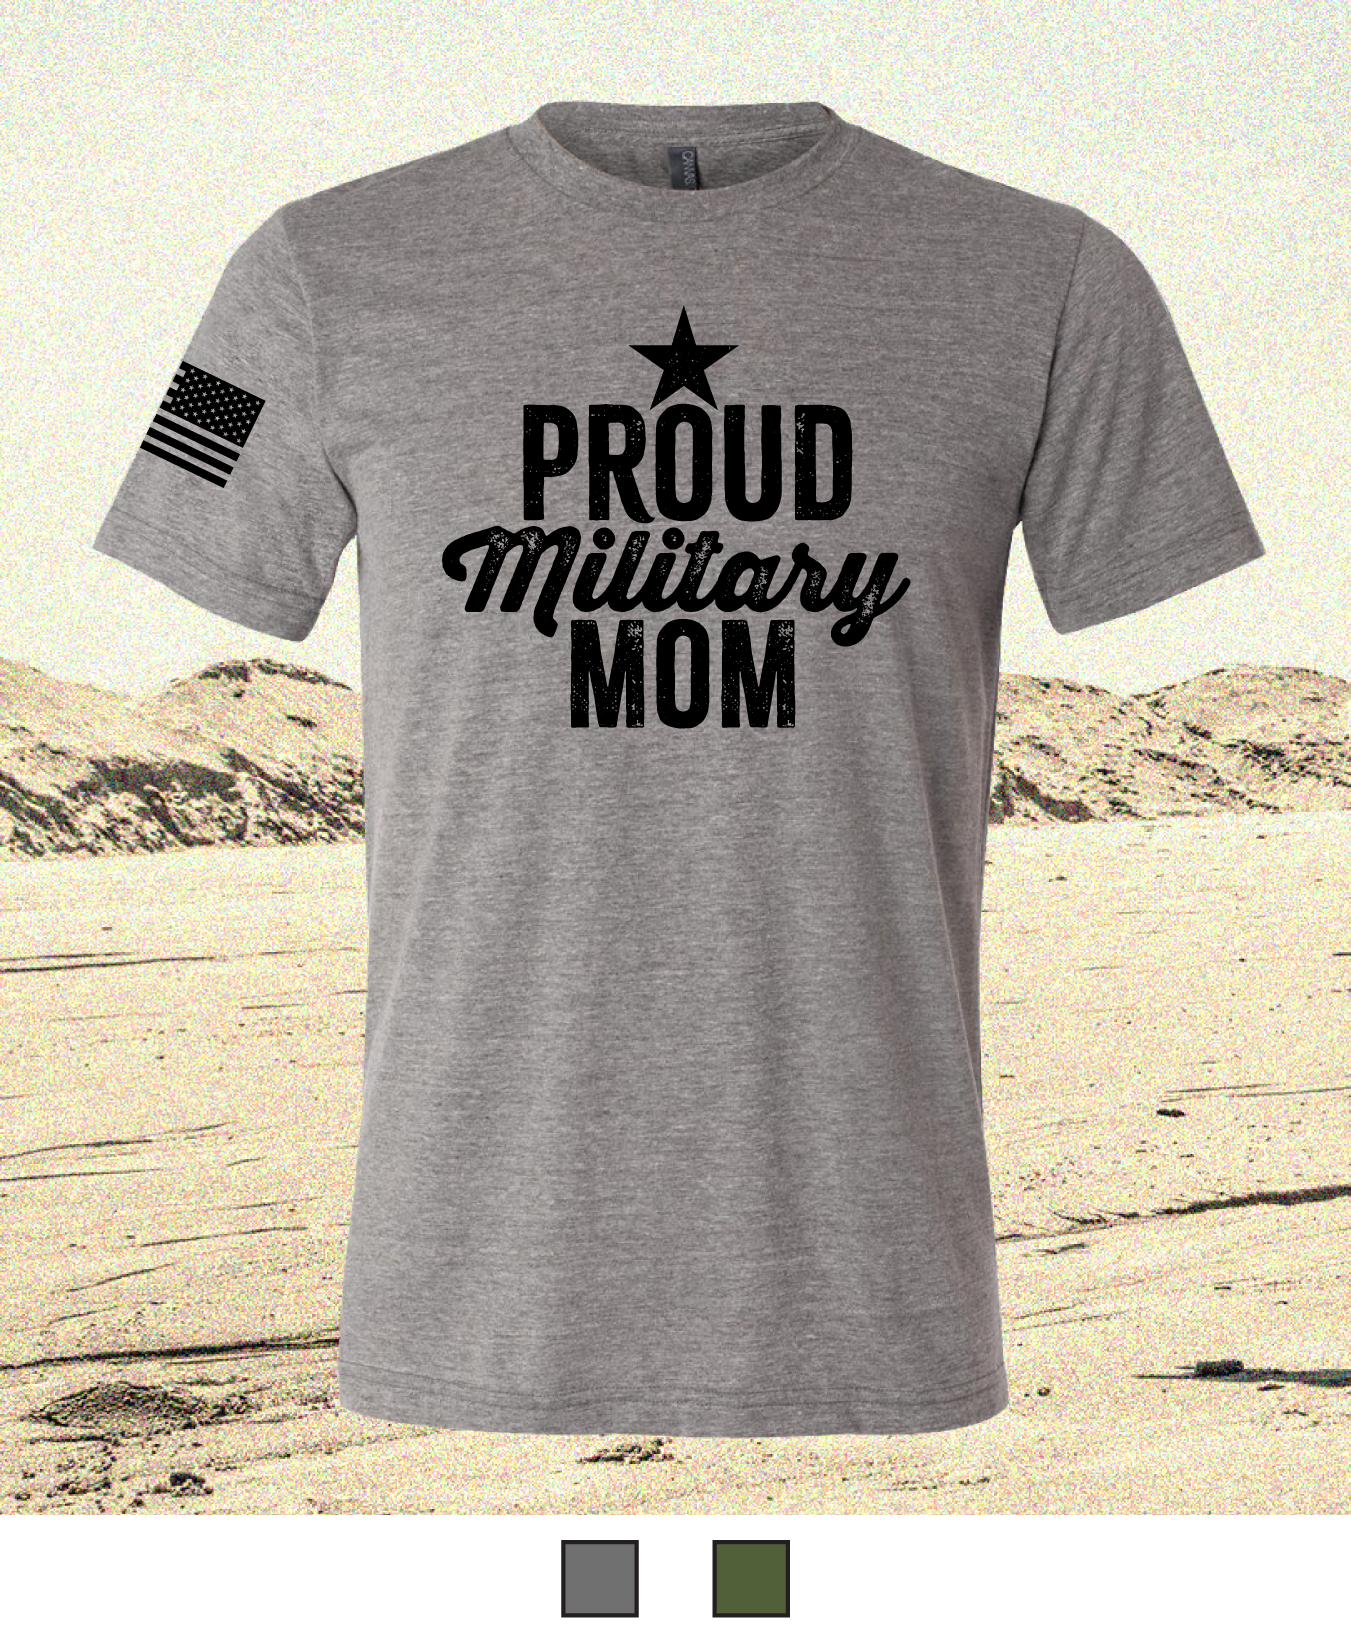 CUSTOM Emblem Mother's Day Series - Comfort Unisex Triblend SS Tee - Proud Military Mom